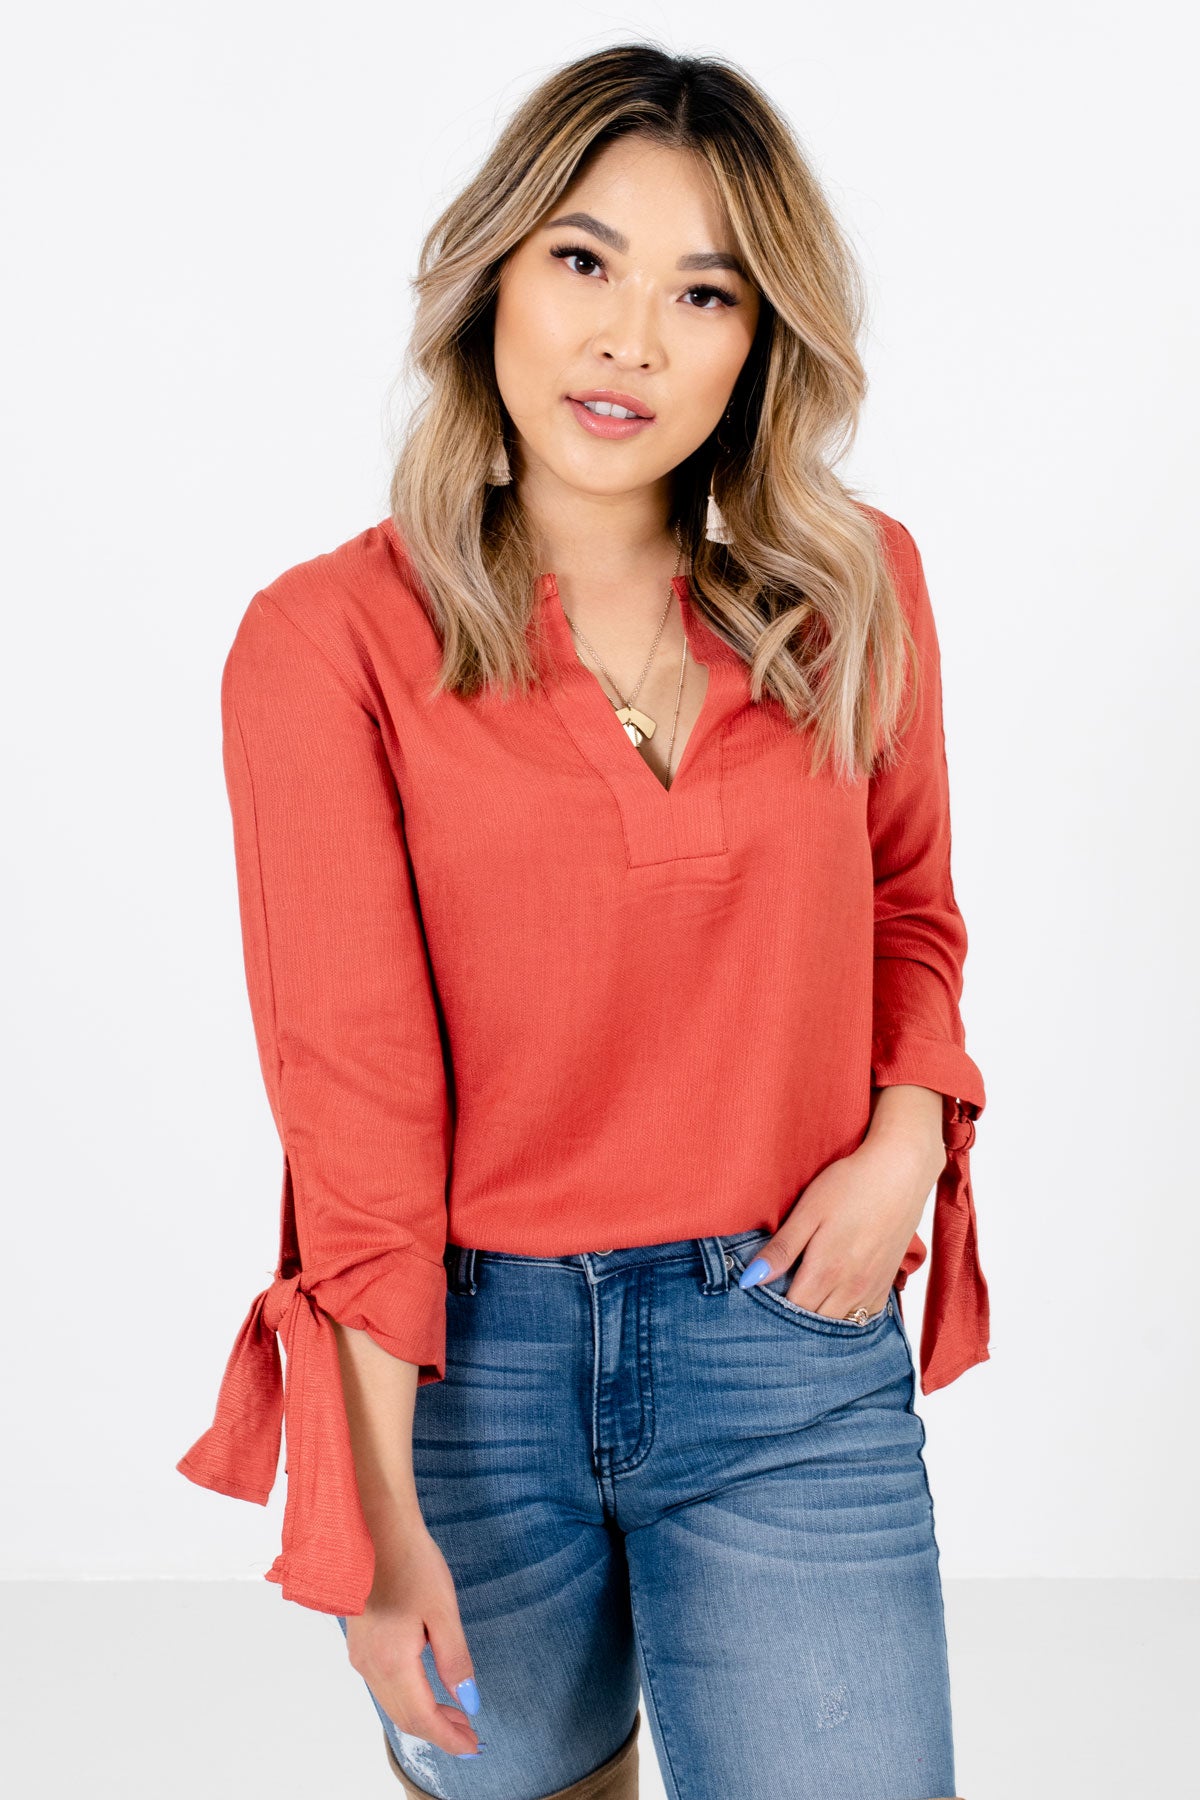 Women’s Dark Coral Lightweight High-Quality Material Boutique Blouse